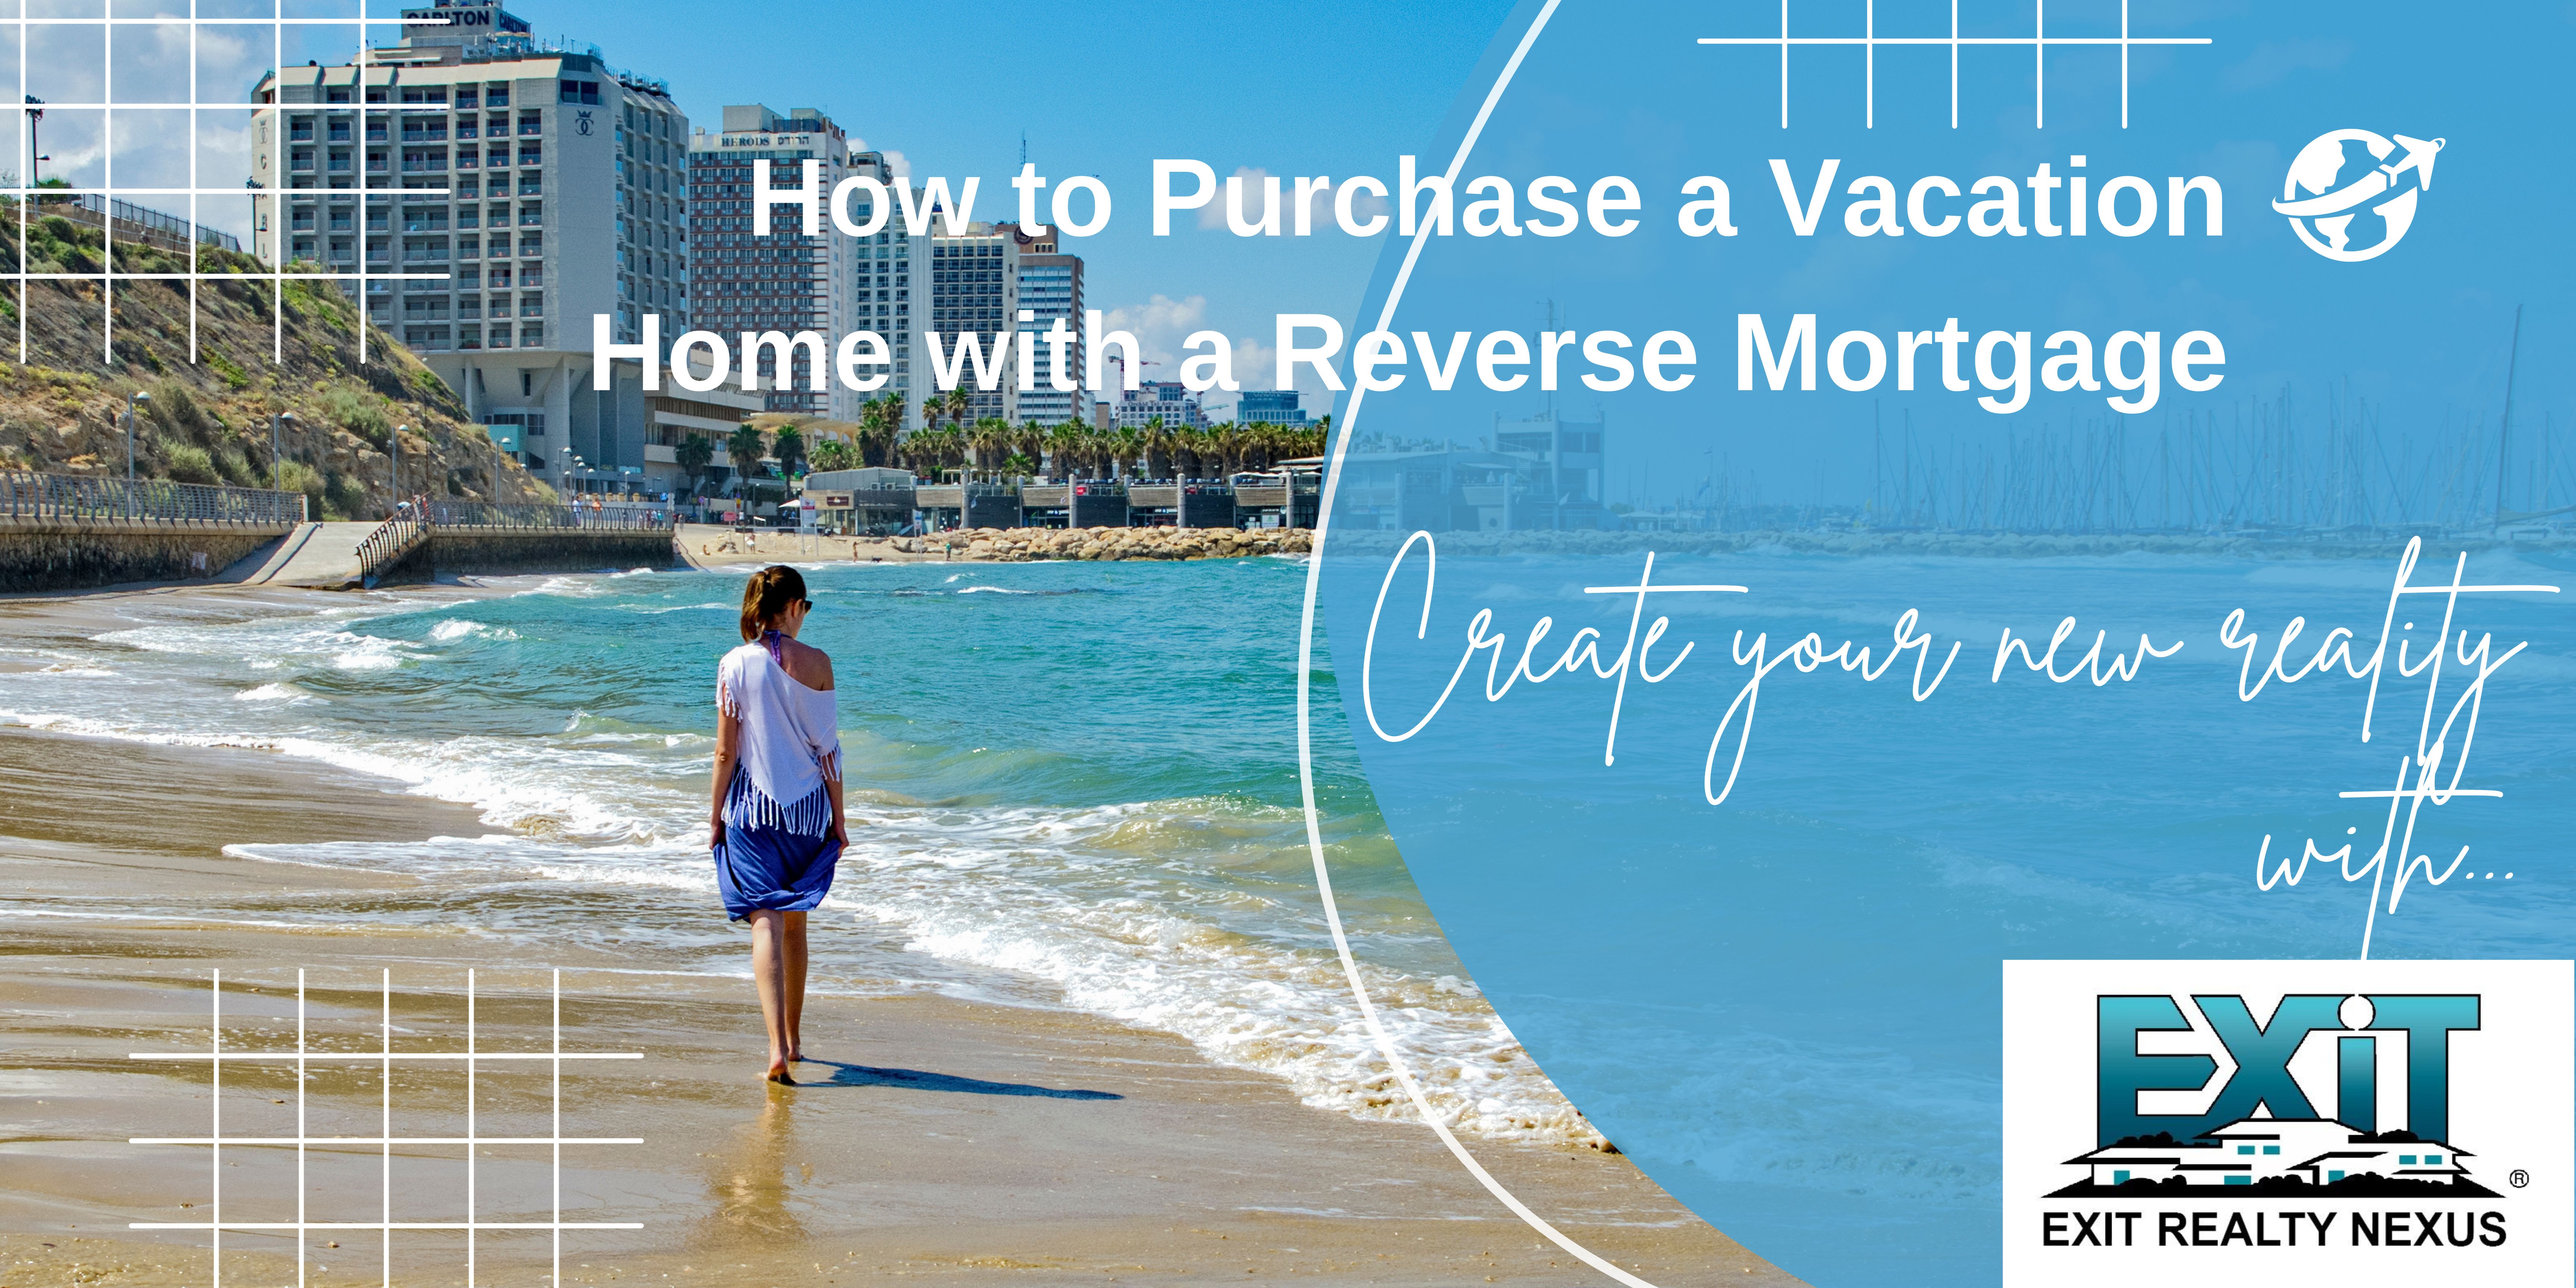 How to Purchase a Vacation Home or Second Home with a REVERSE MORTGAGE